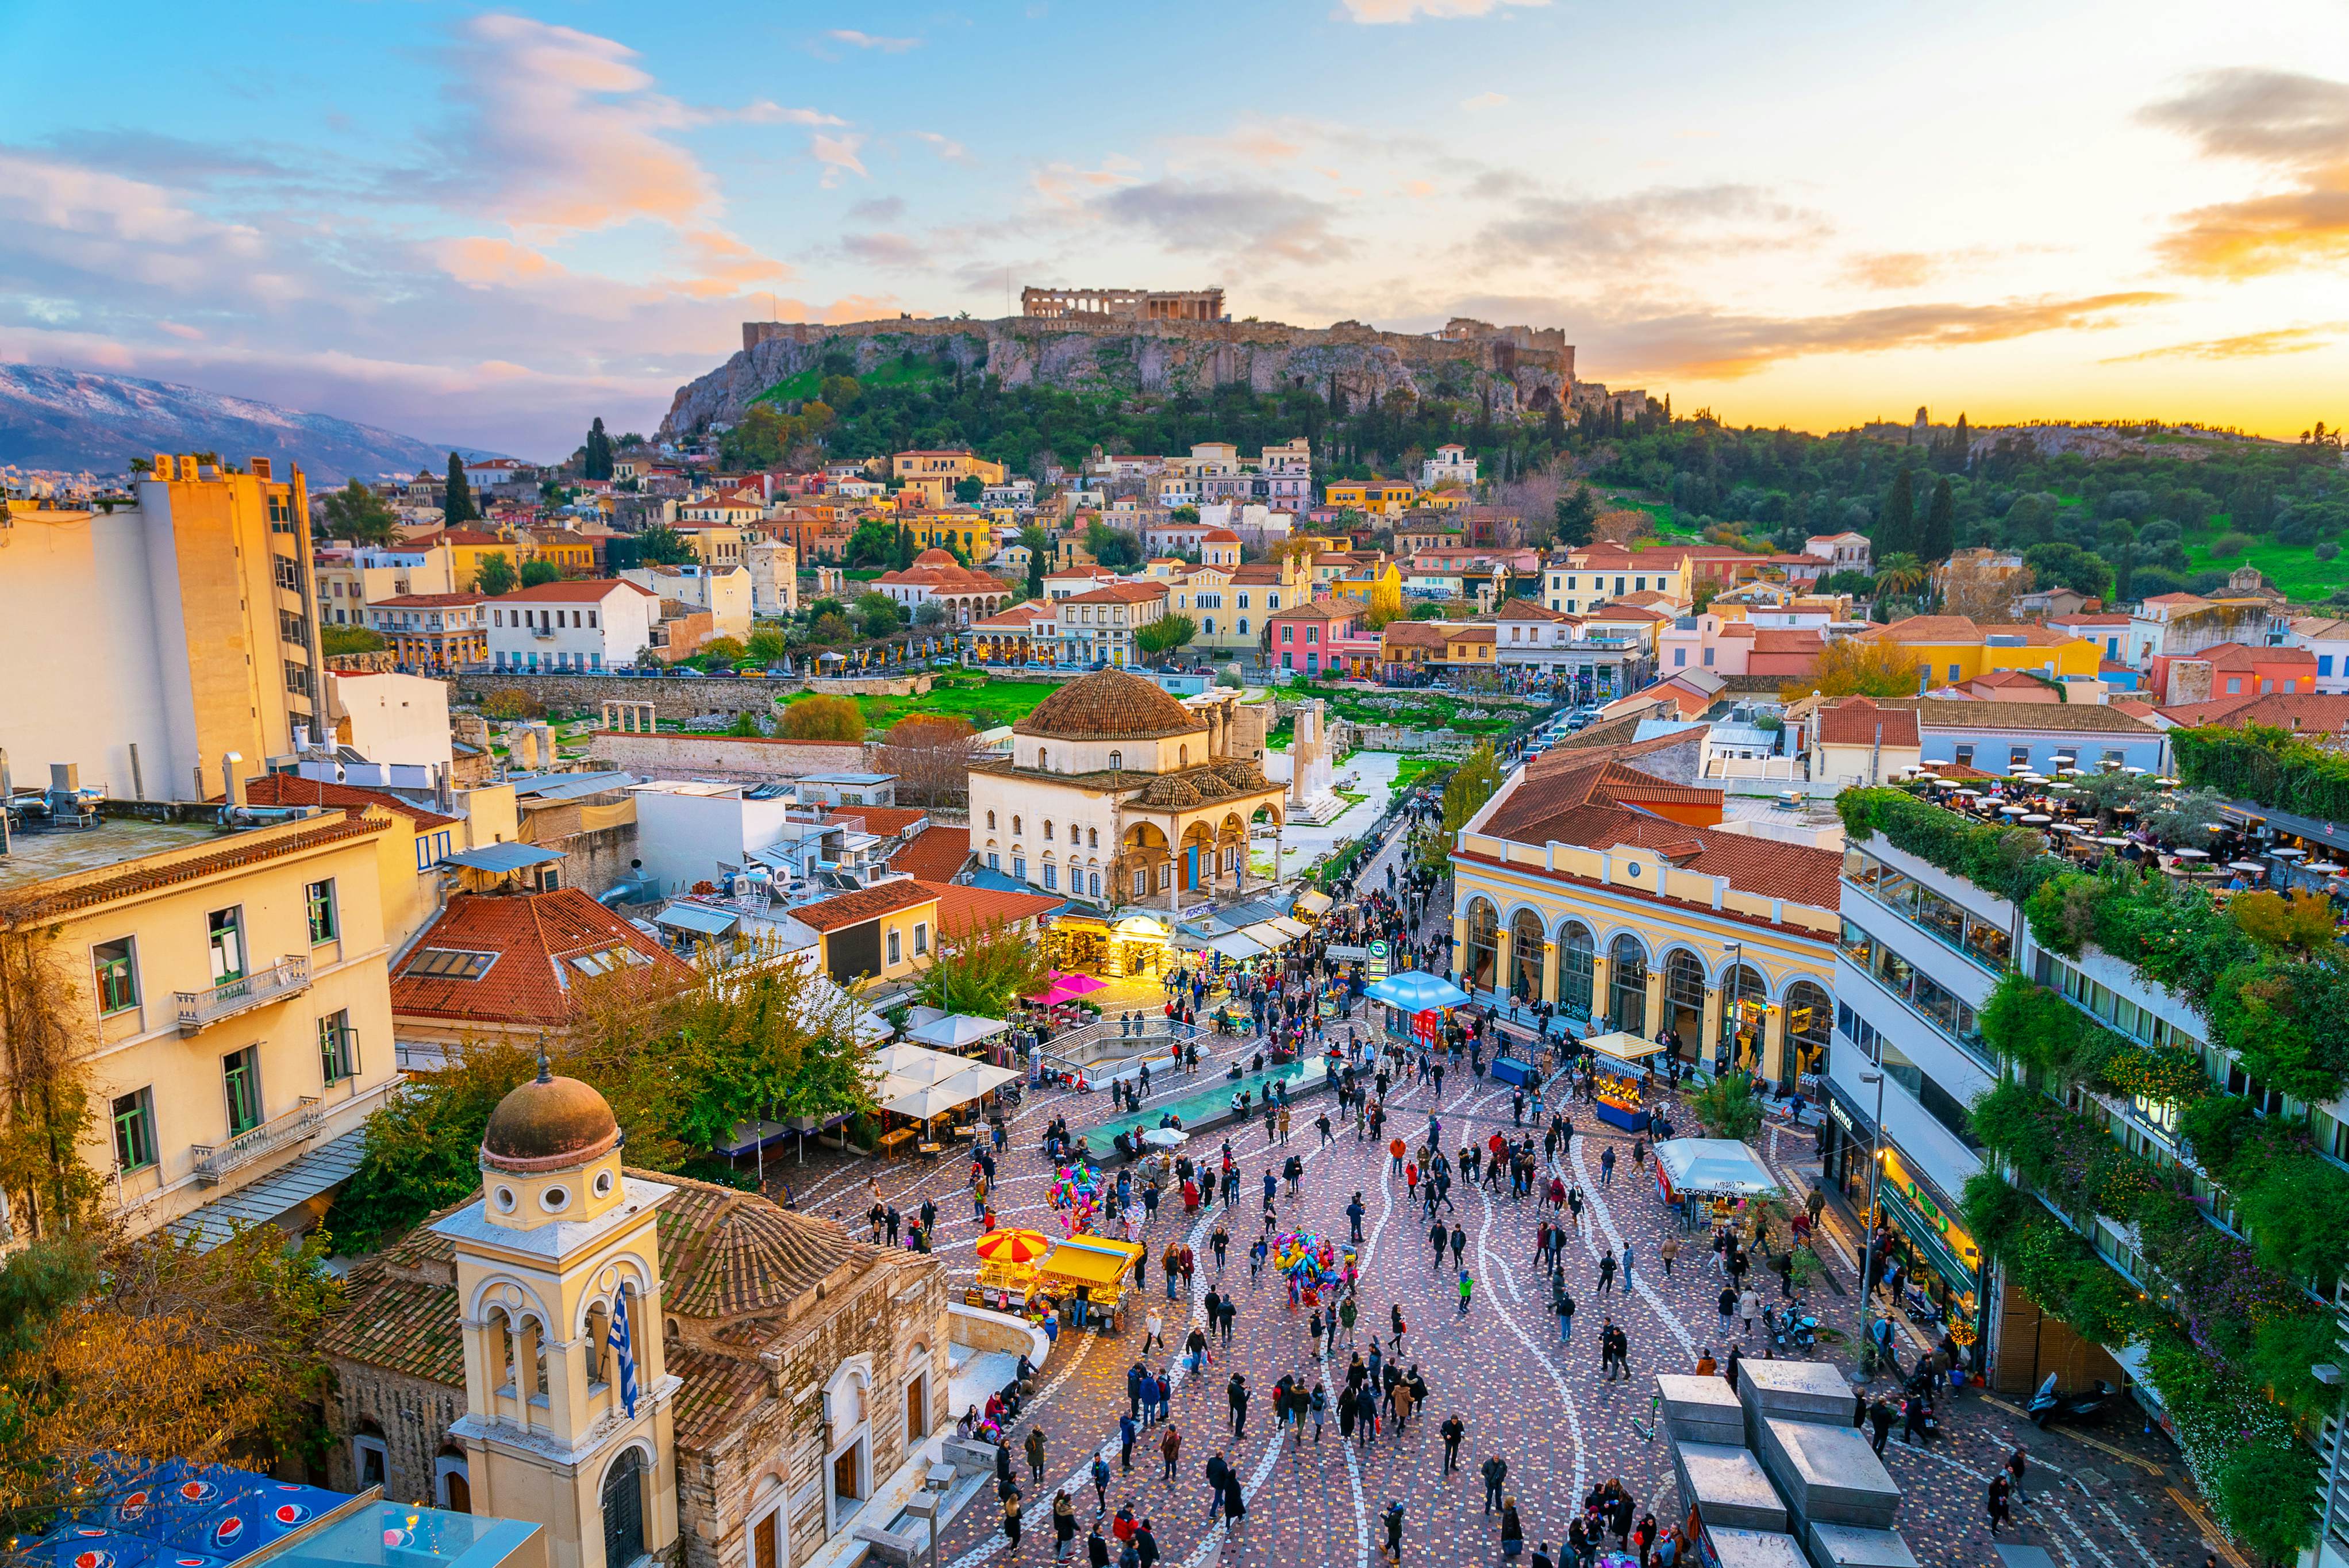 is it safe to visit athens greece now